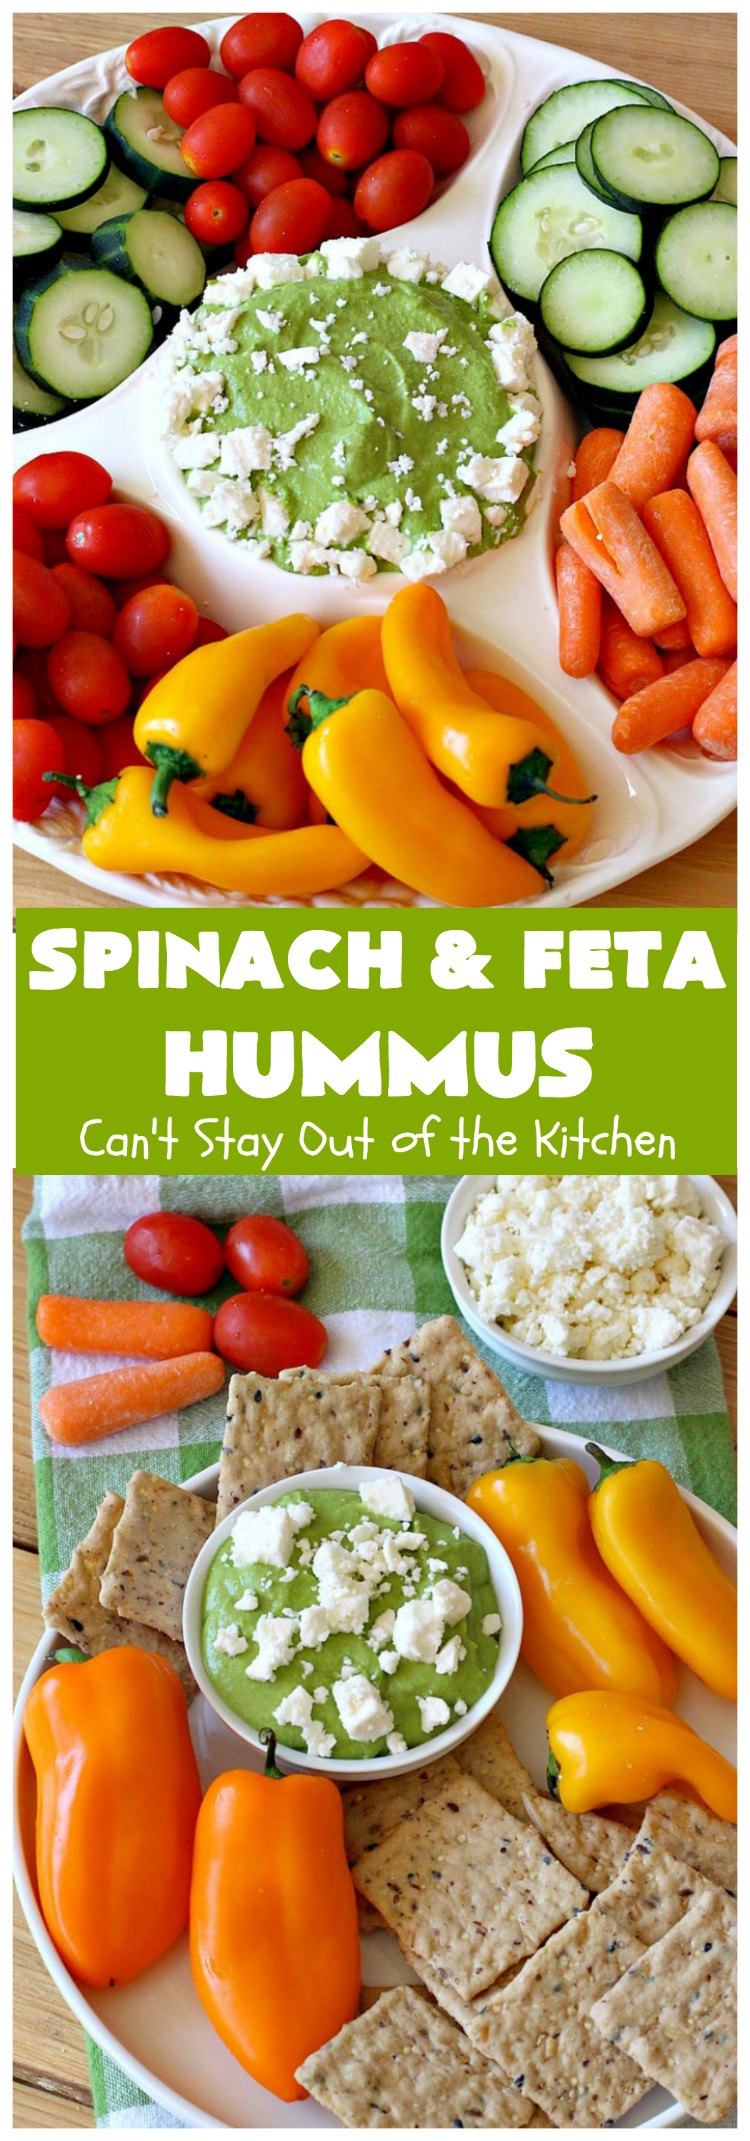 Spinach and Feta Hummus | Can't Stay Out of the Kitchen